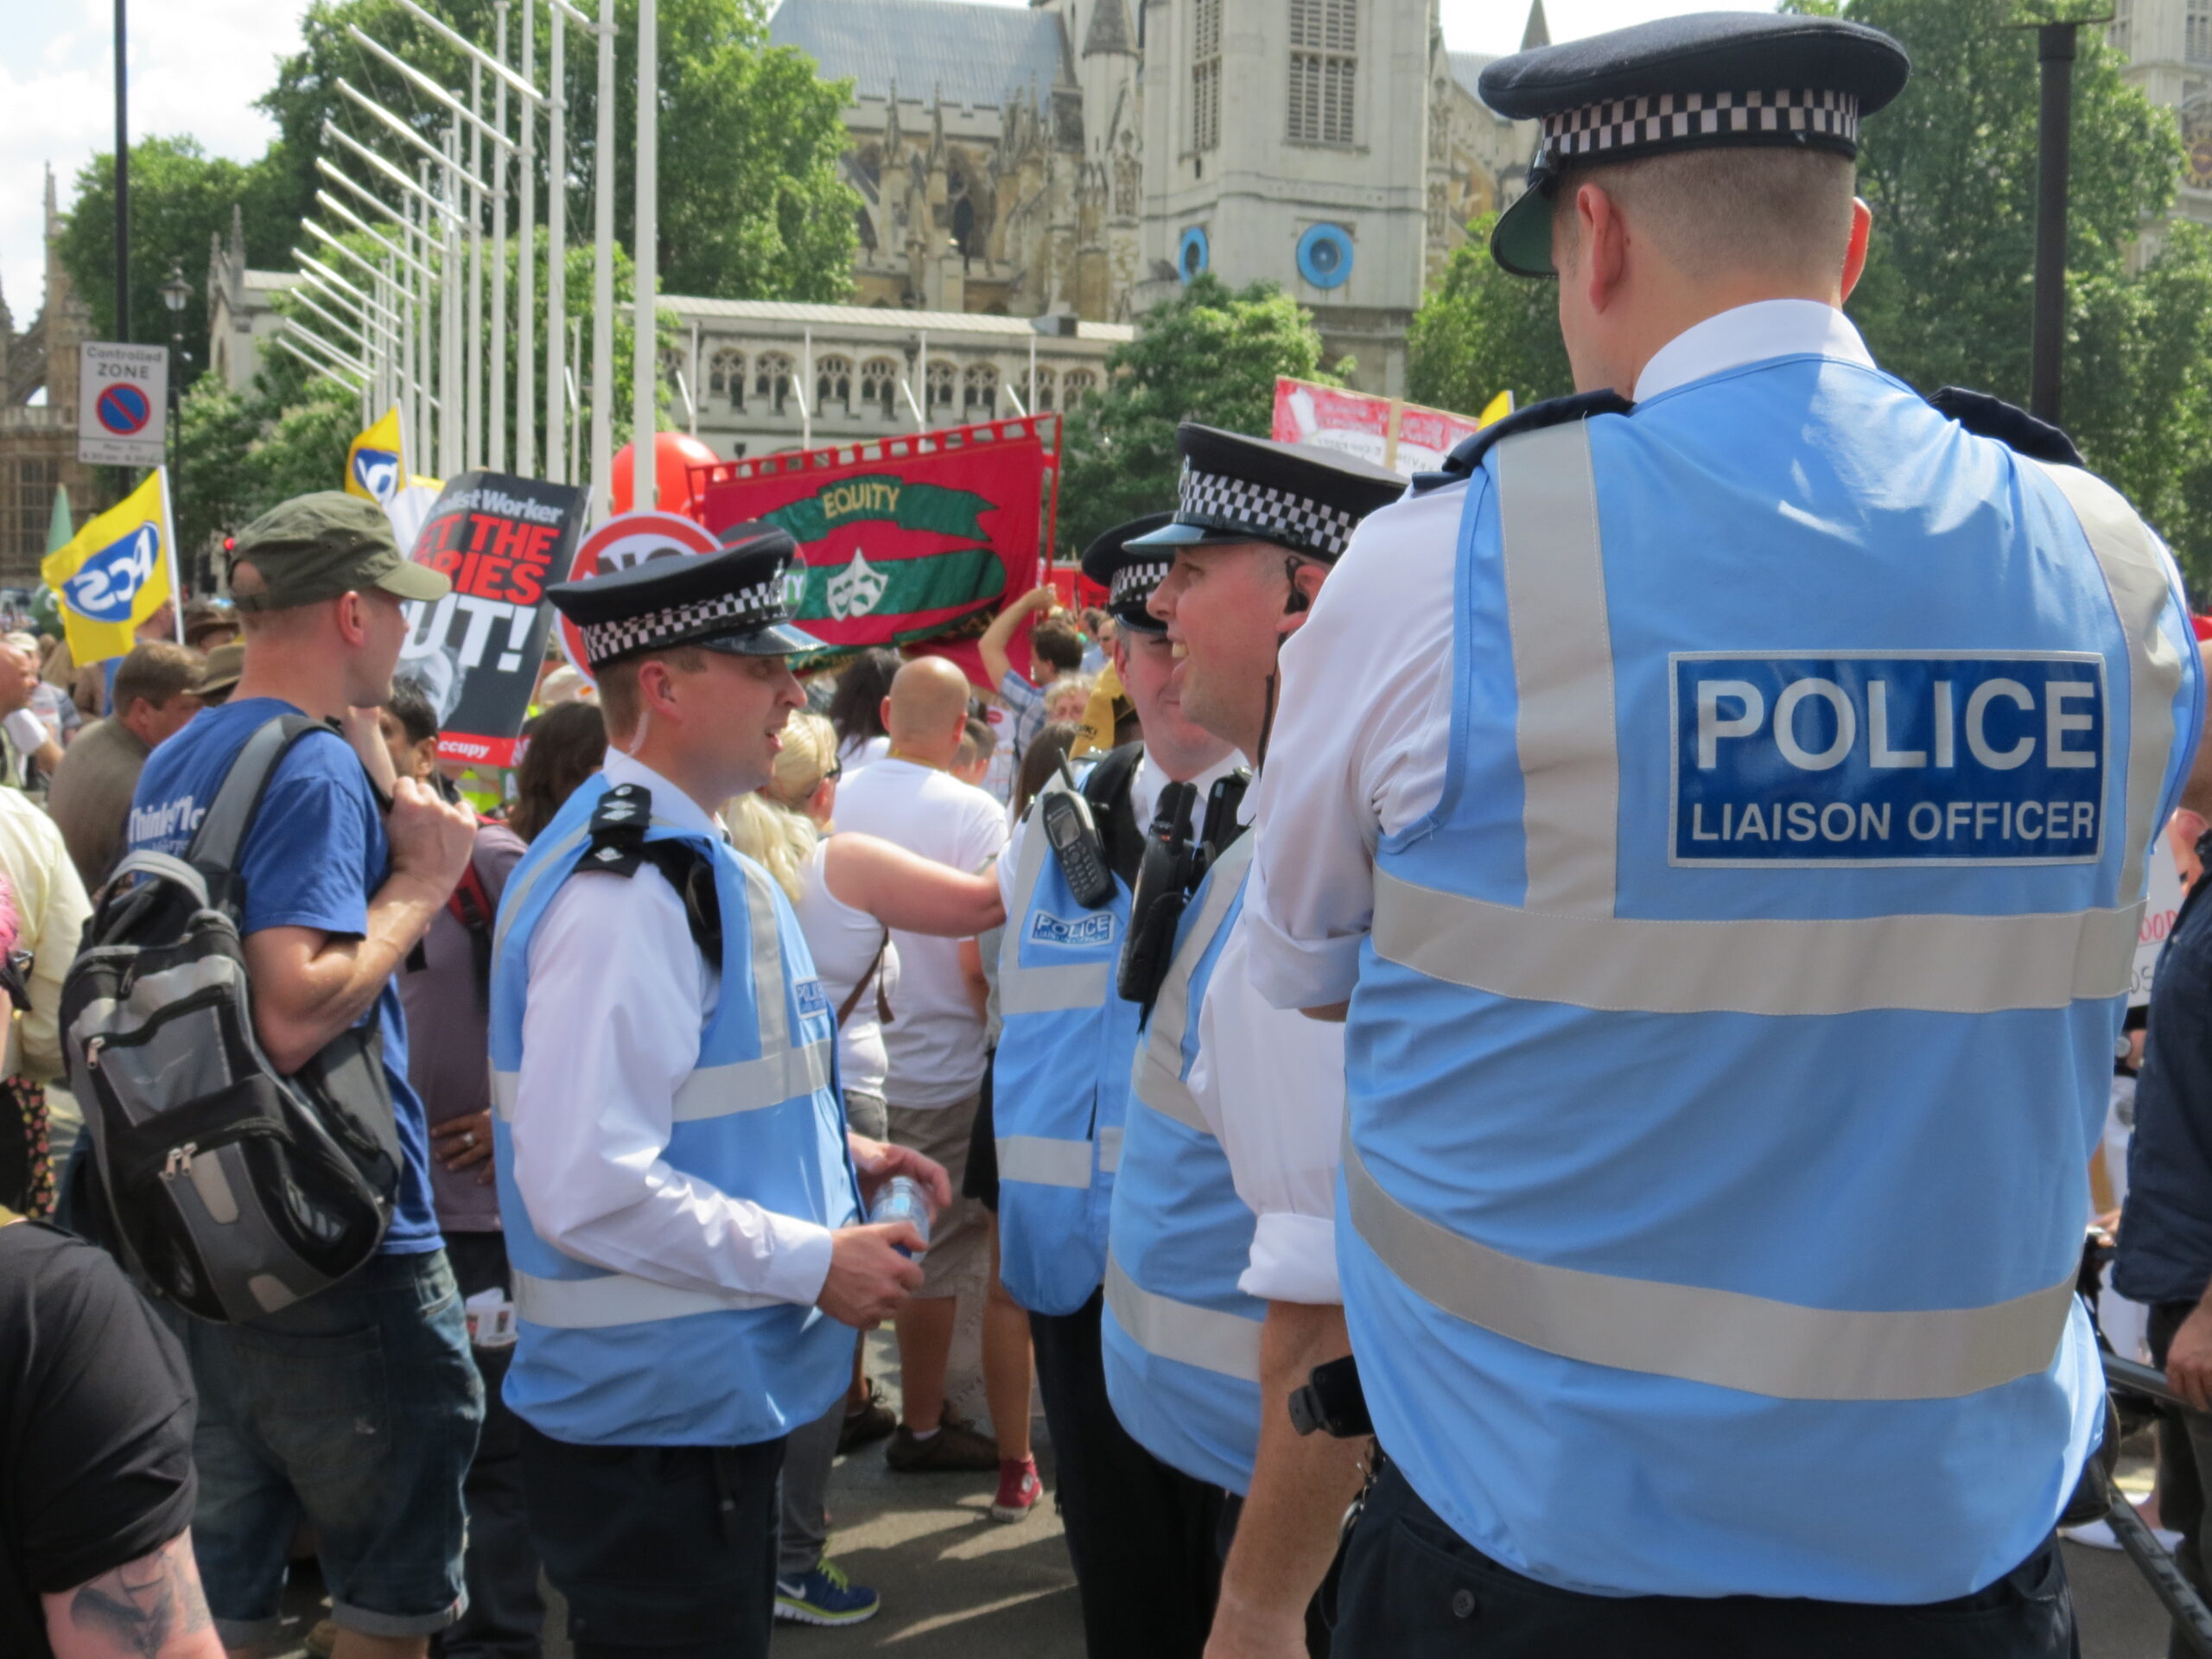 What are Police Liaison Officers?